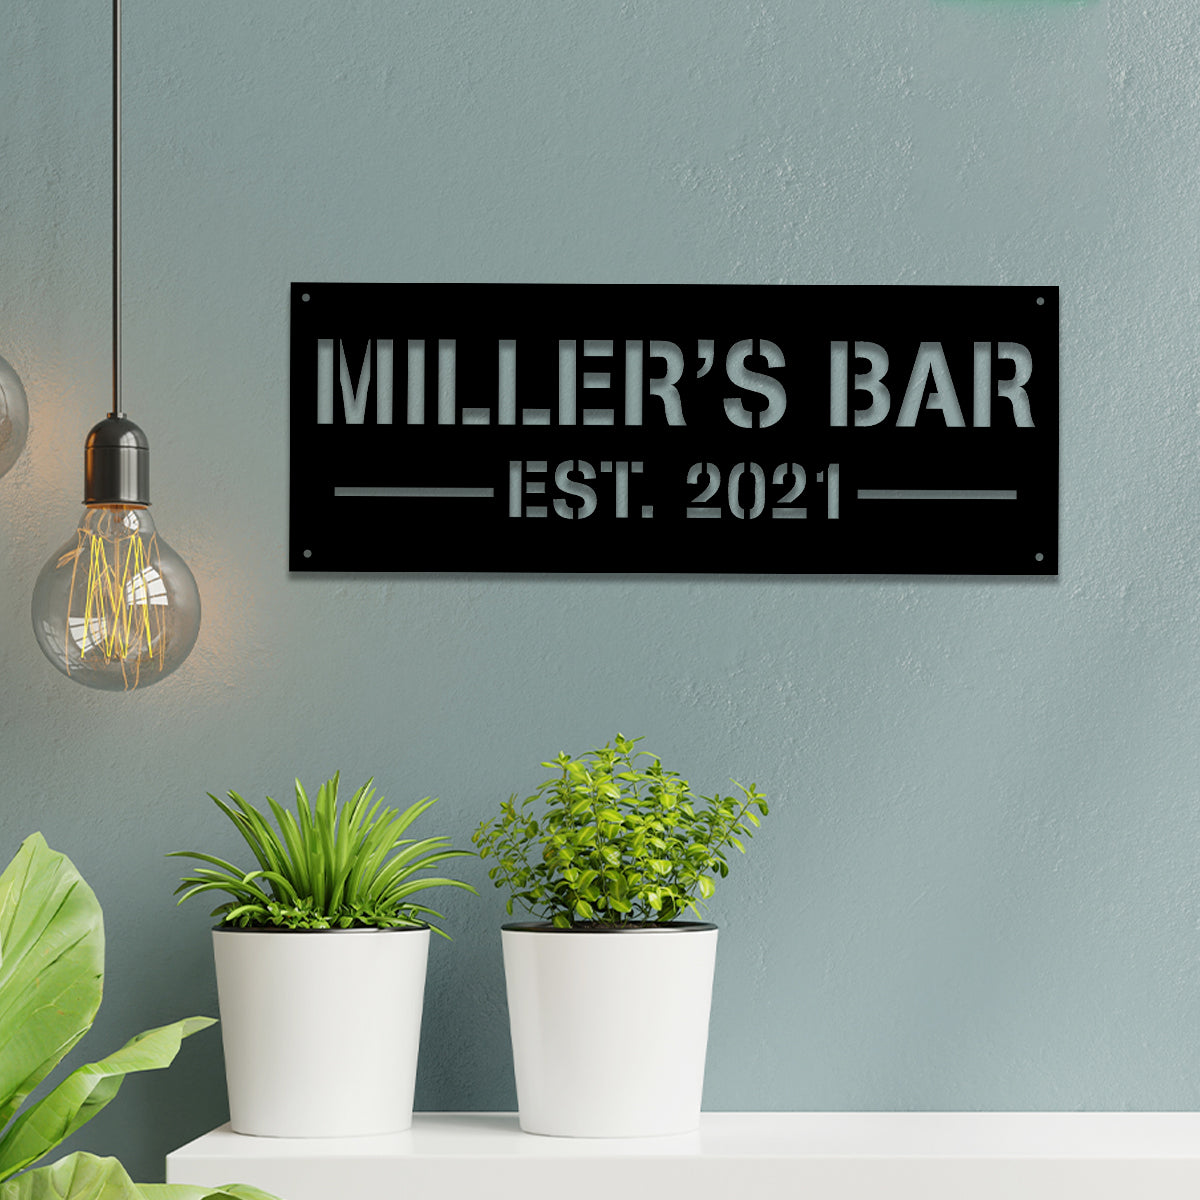 Personalized Metal Bar Sign, Pub, Tap, Lounge, Home Wall Decor, Wedding, Anniversary Art Gift For Him/her